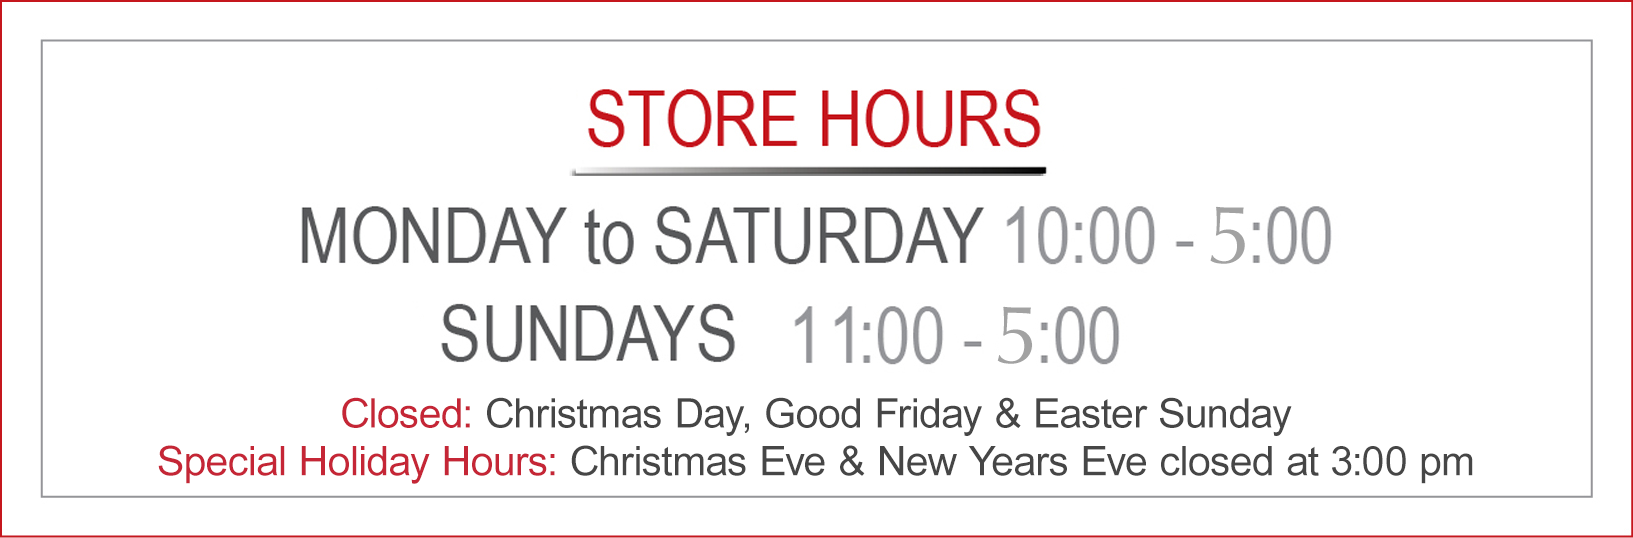 store hours